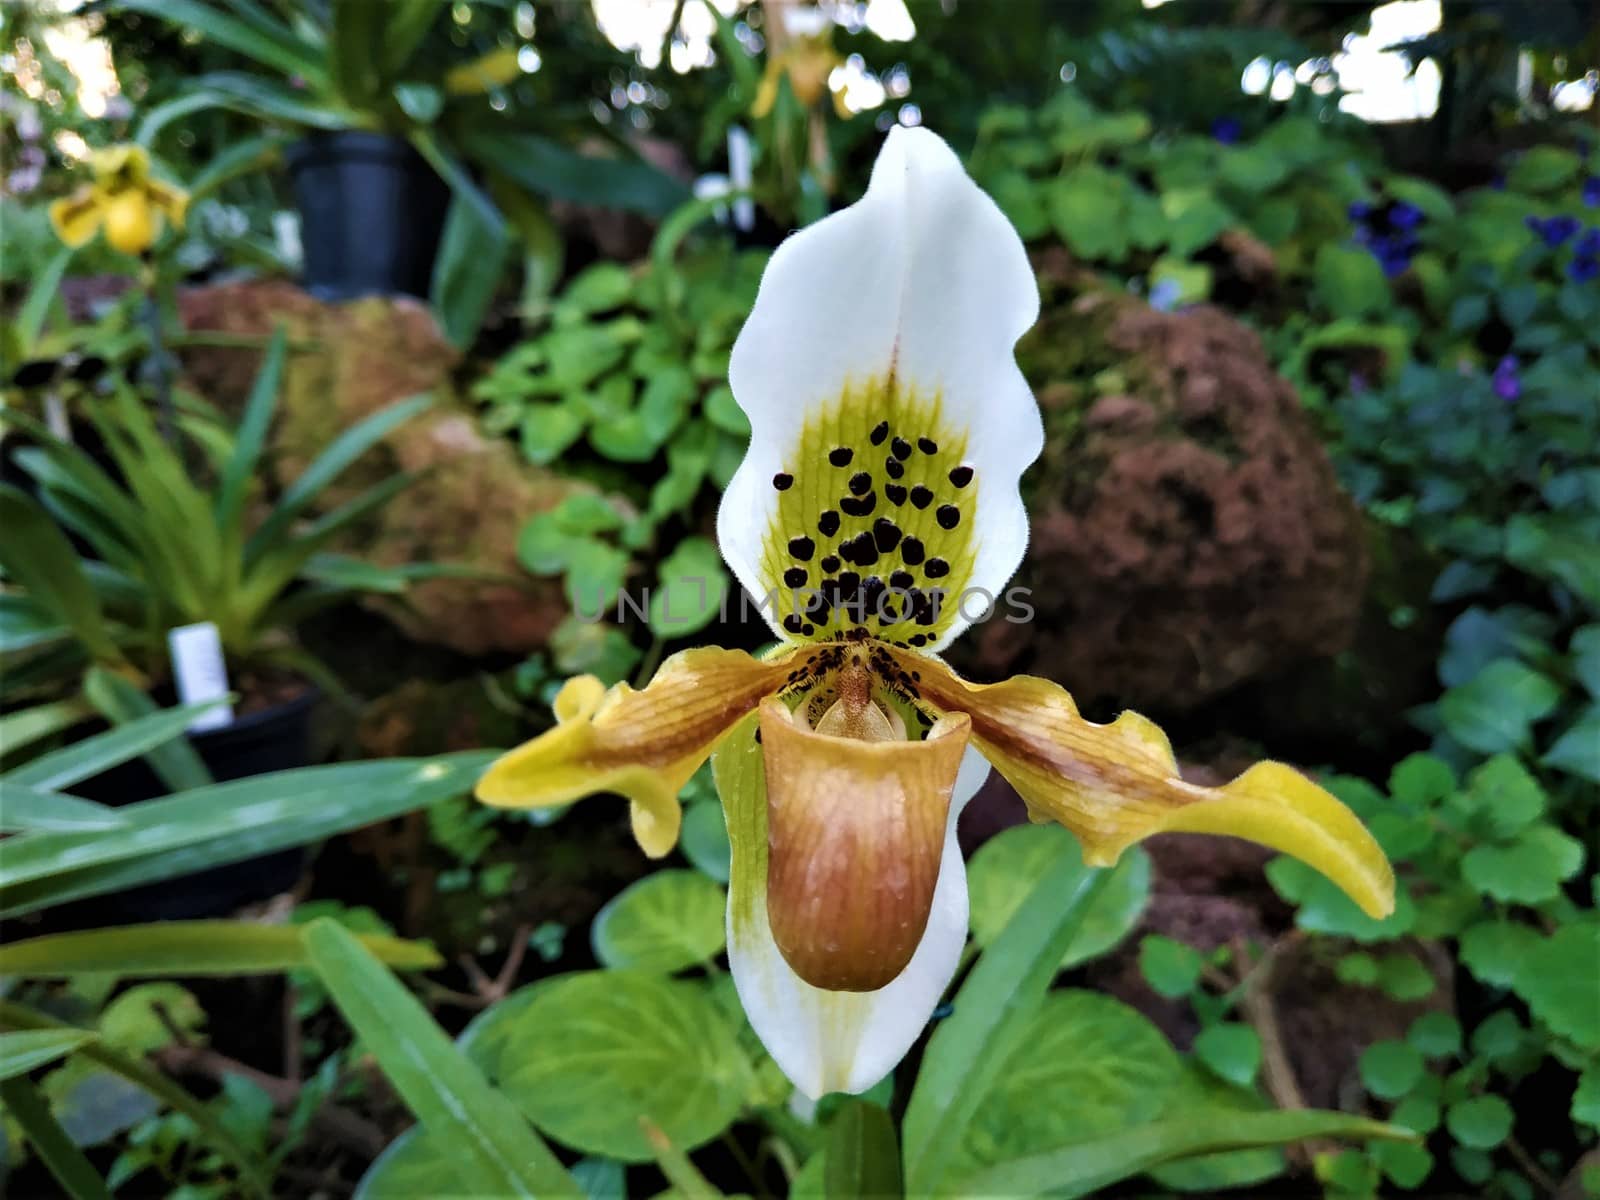 Spotted blossom of a Paphiopedilum insigne hybride orchid